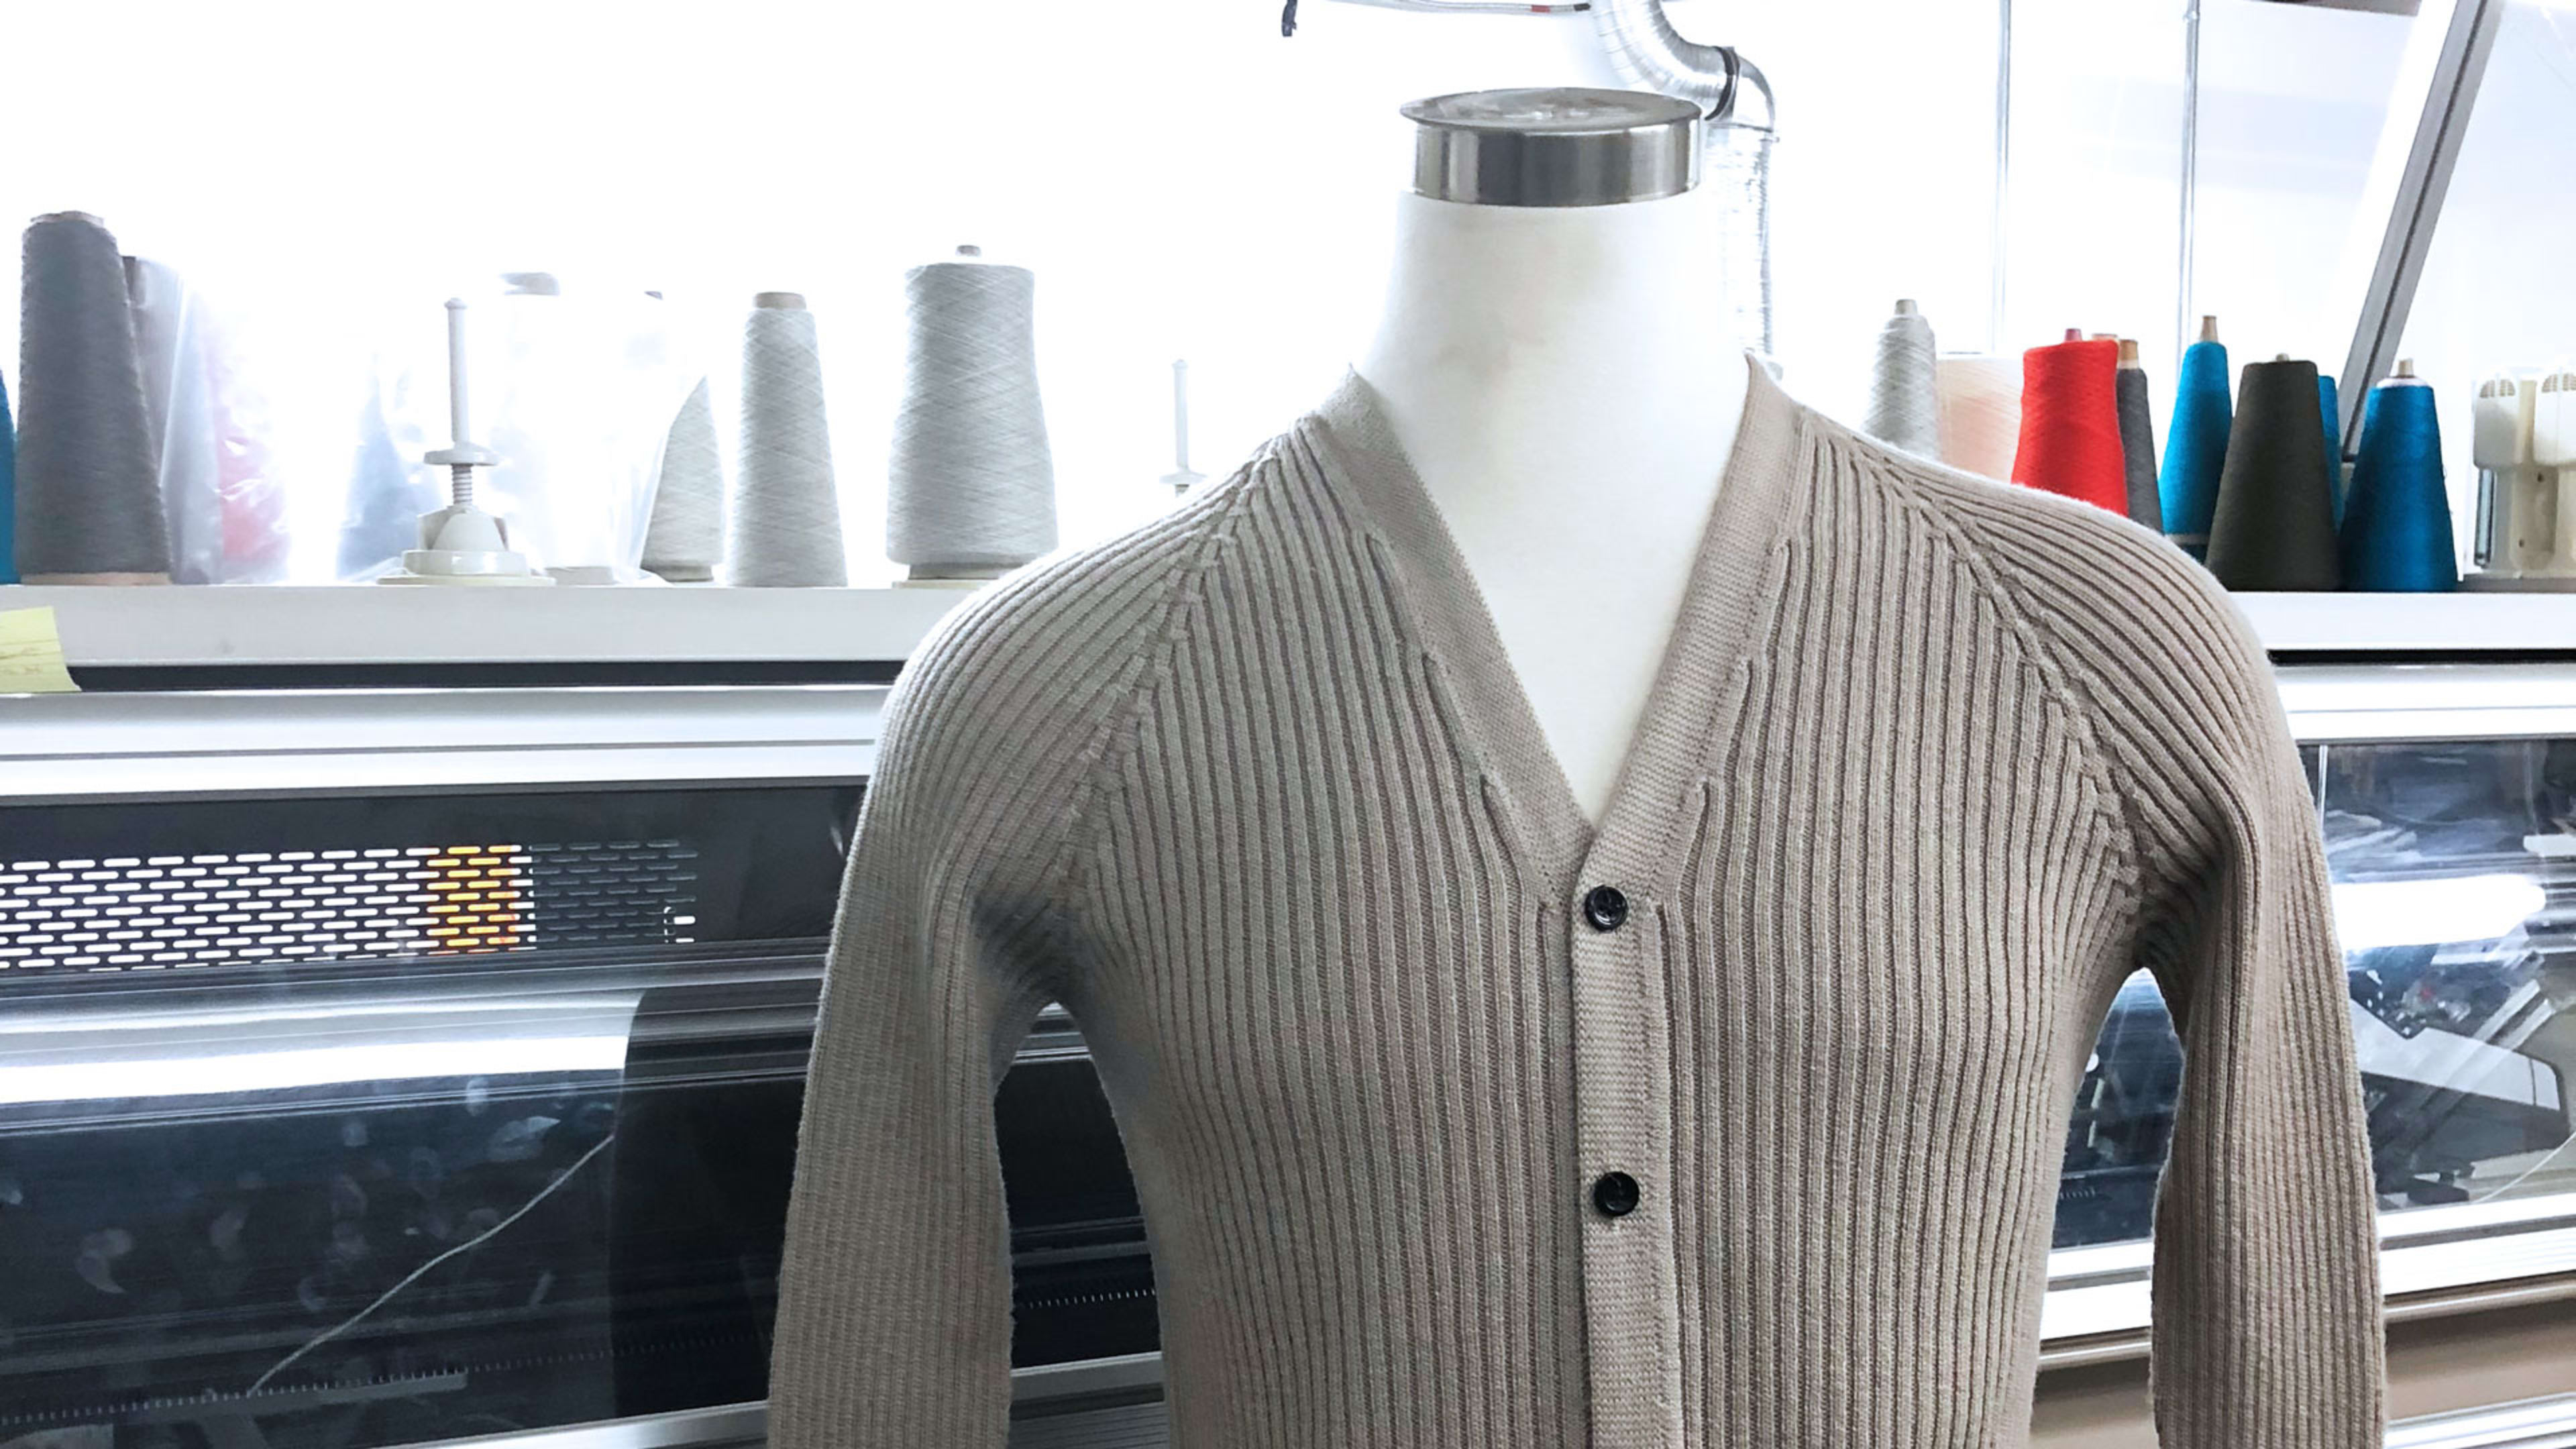 This clothing factory cuts waste by machine-knitting sweaters on demand